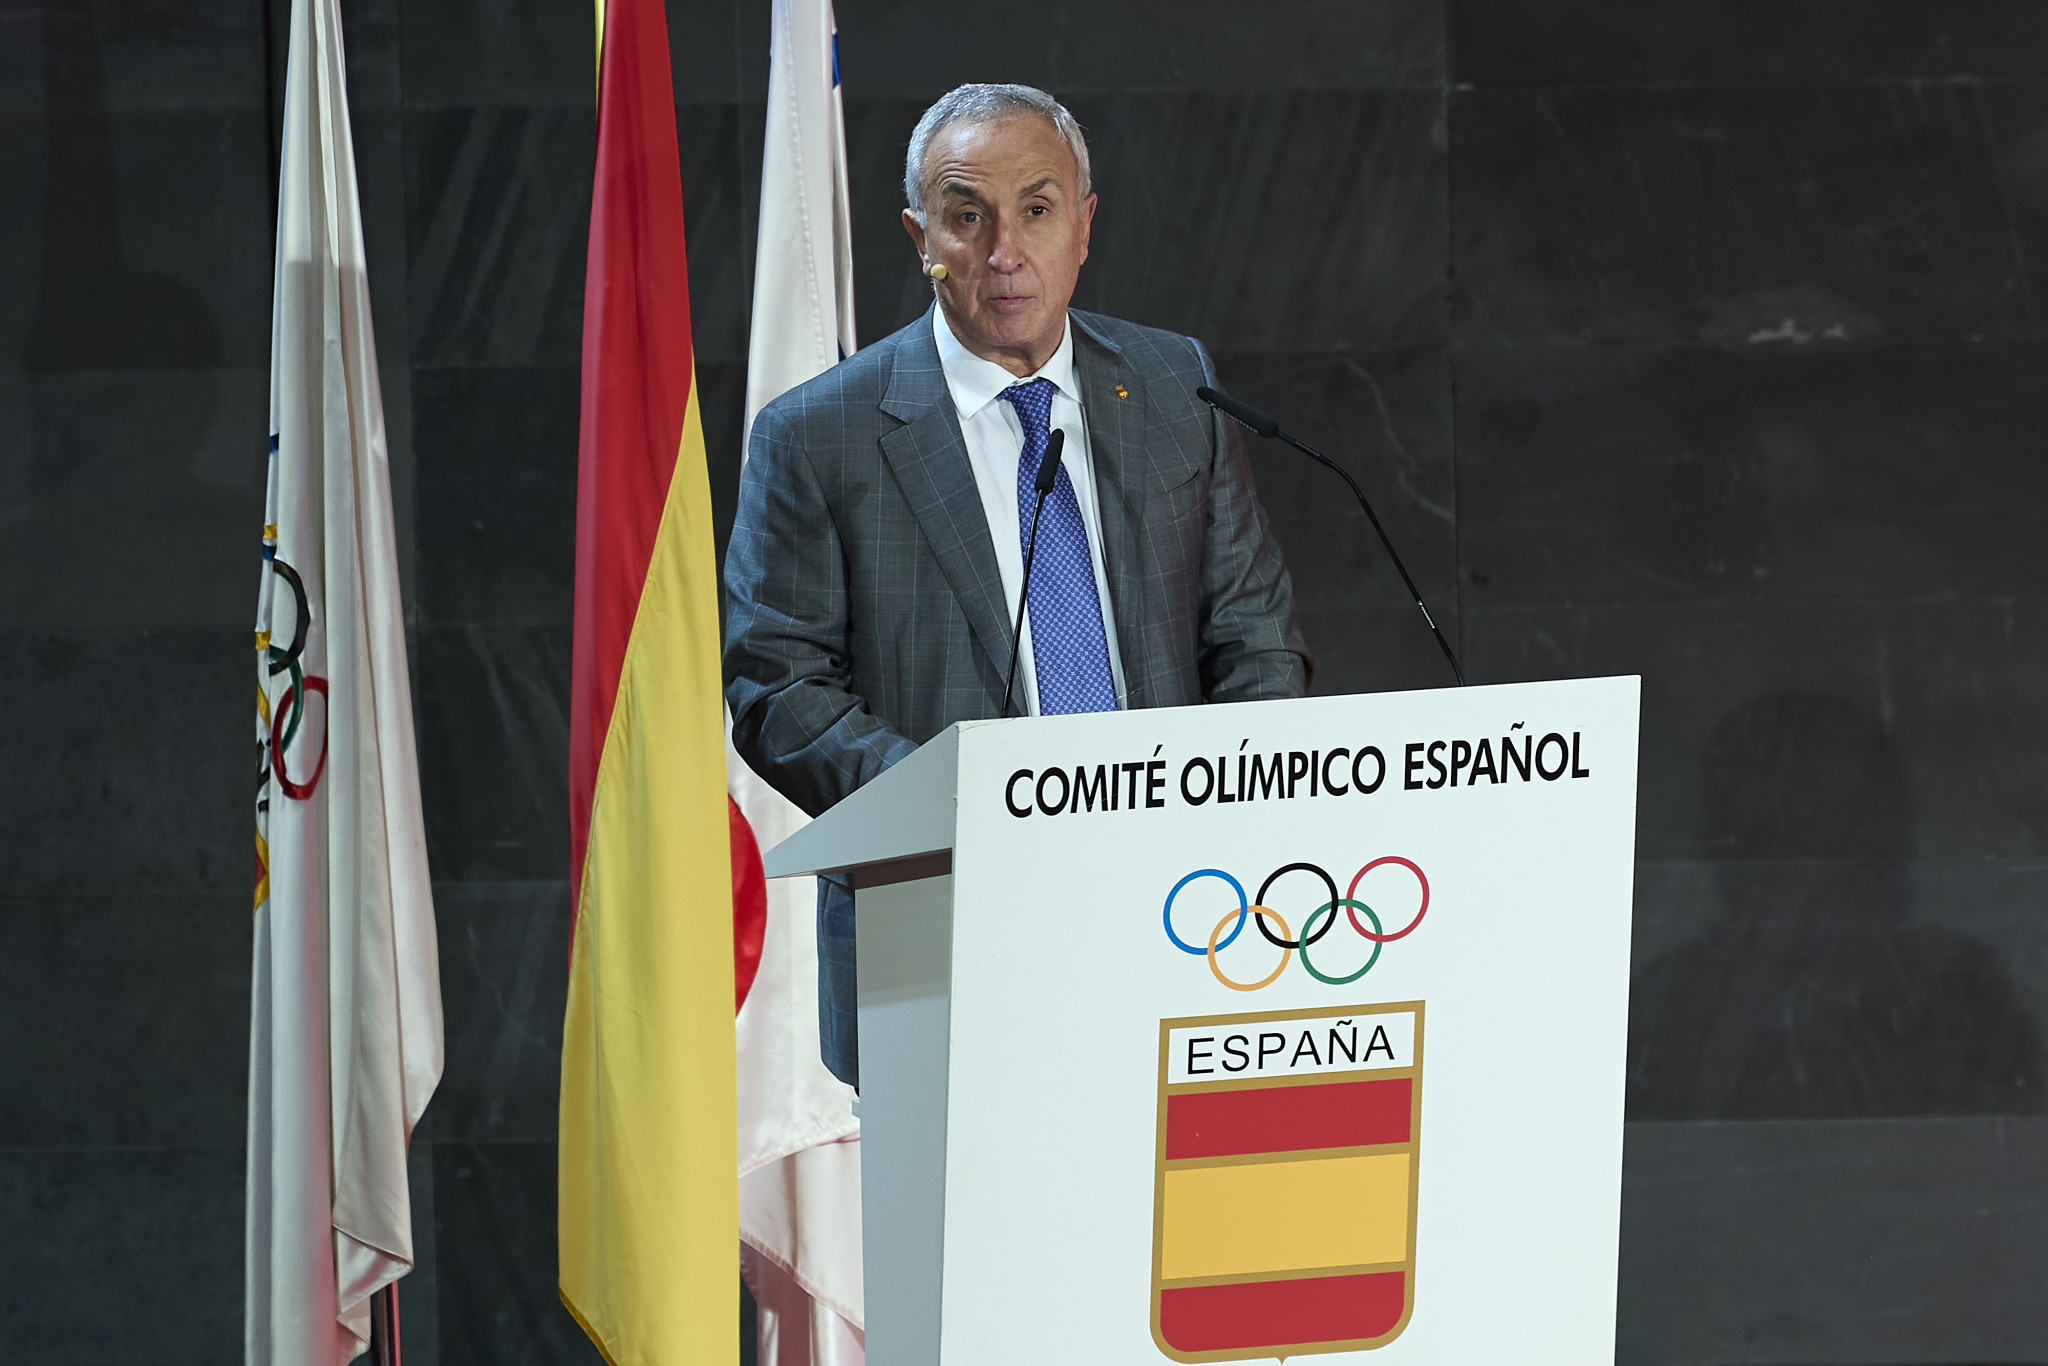 Pyrenees-Barcelona bid for 2030 Winter Olympics officially scrapped after weeks of infighting